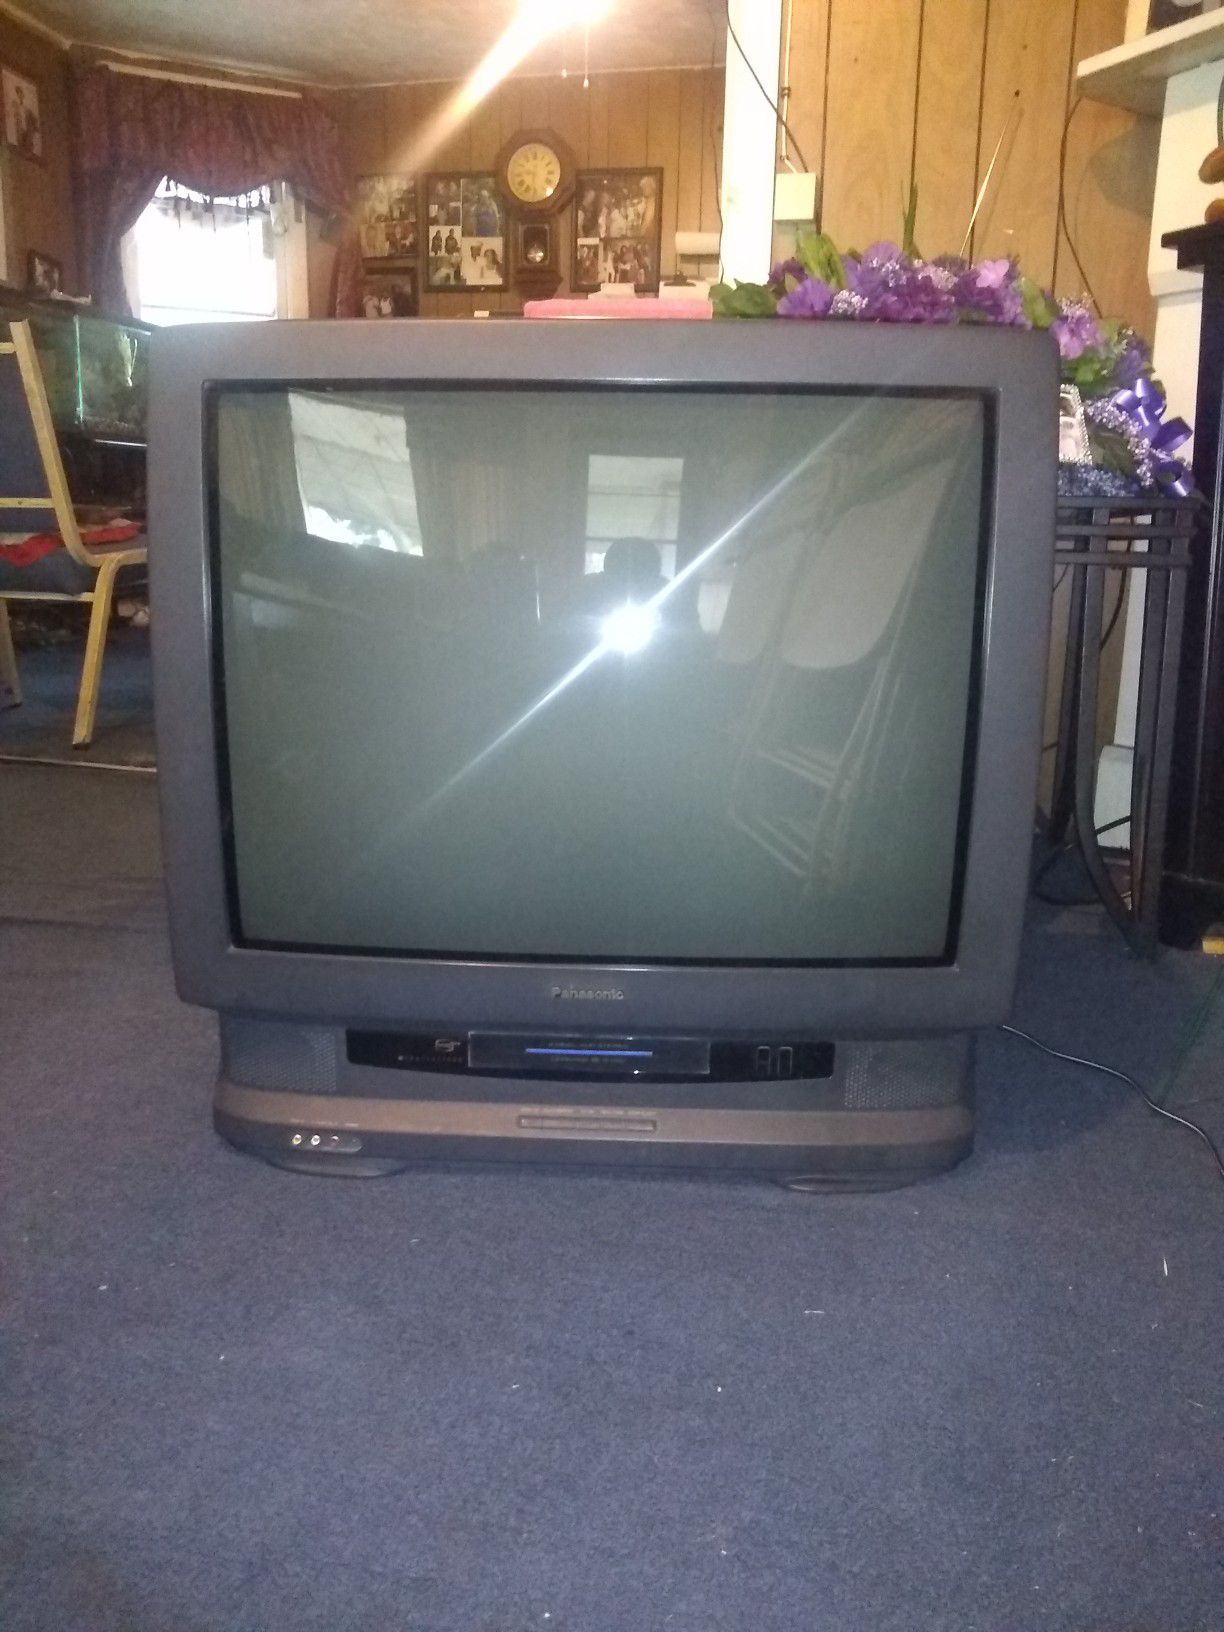 Panasonic tv/with vcr attached